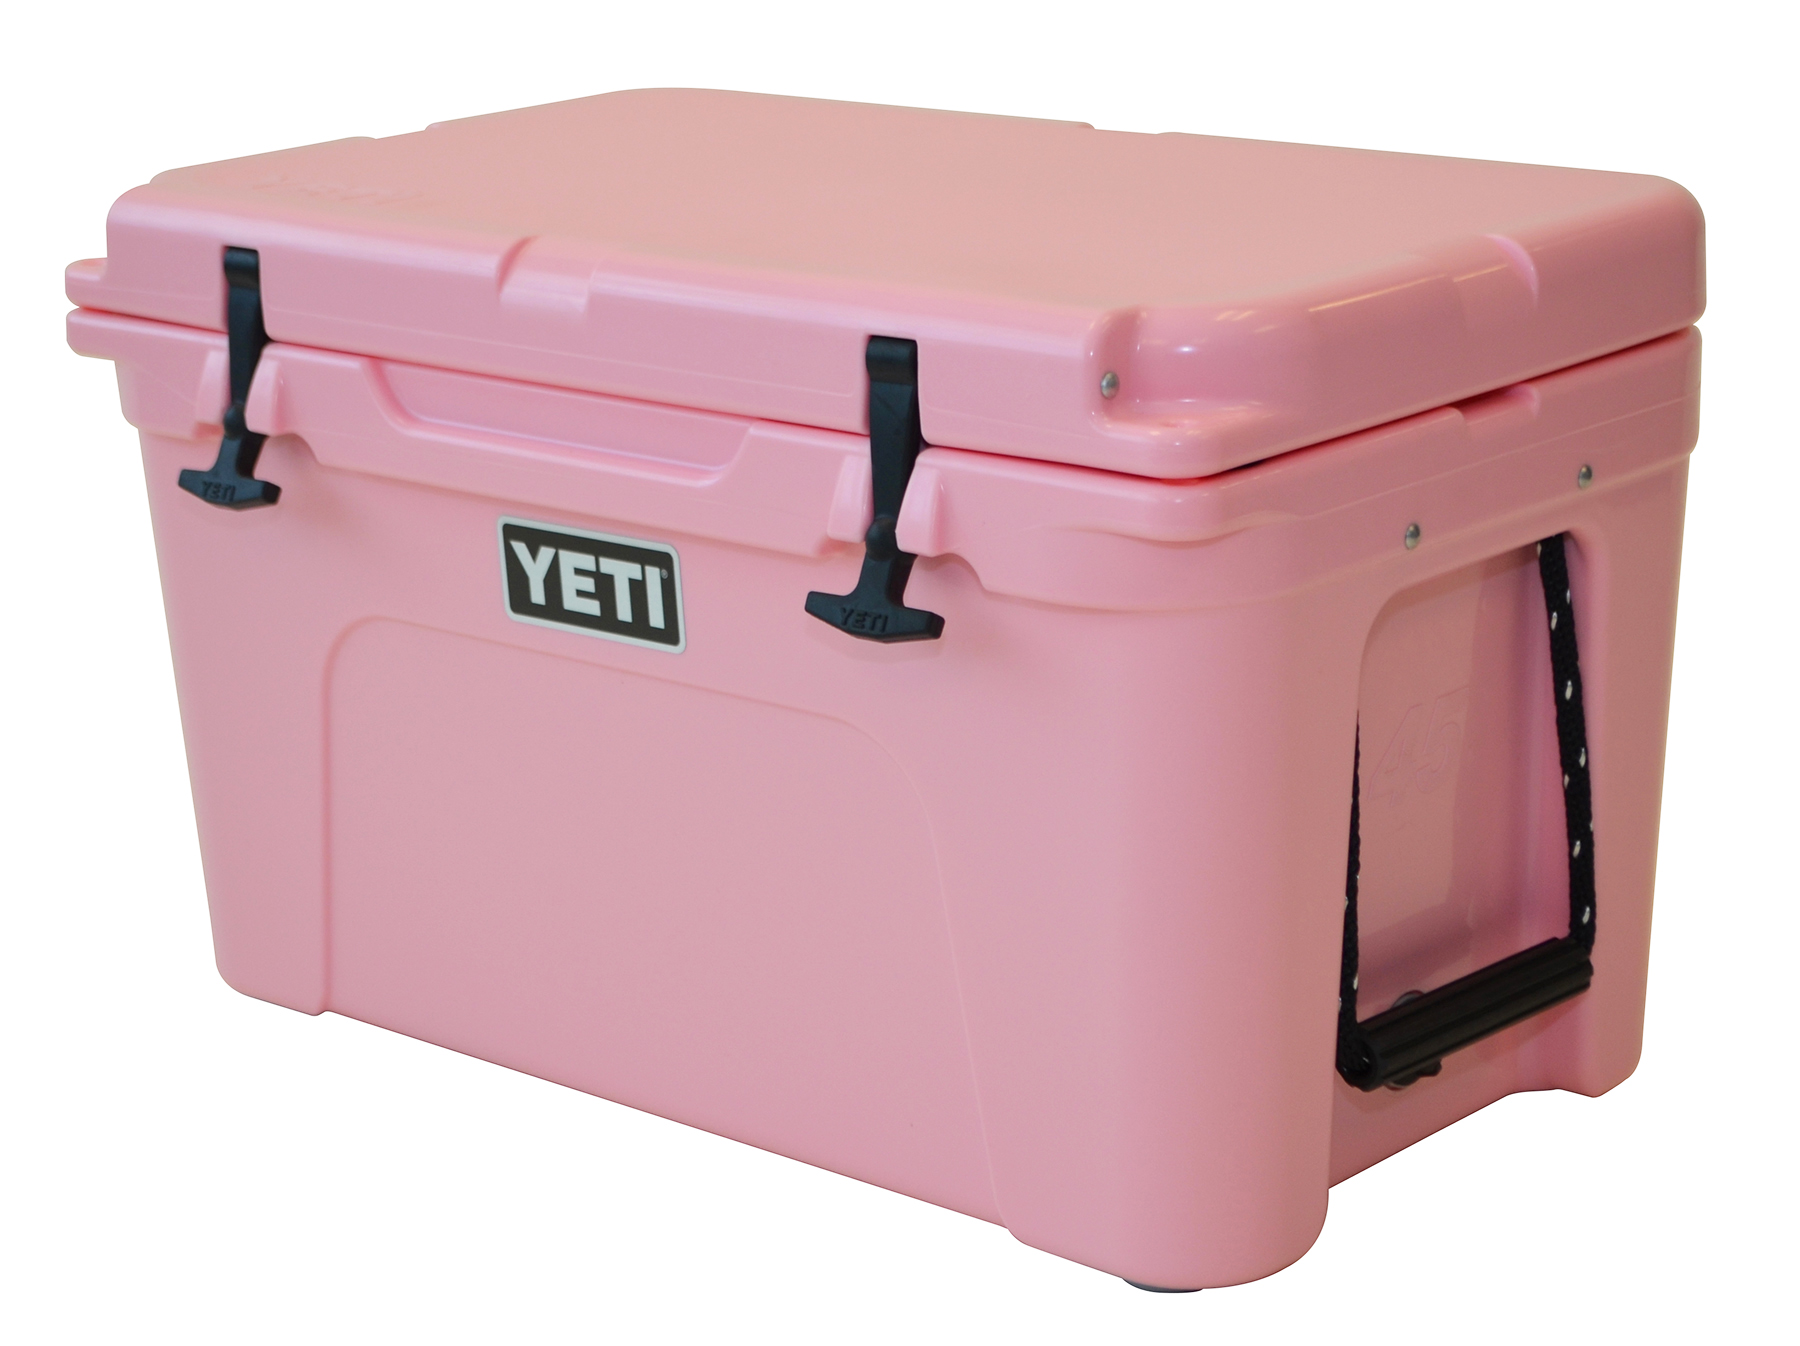 YETI Coolers Auctions Pink Cooler to Benefit American Cancer Society